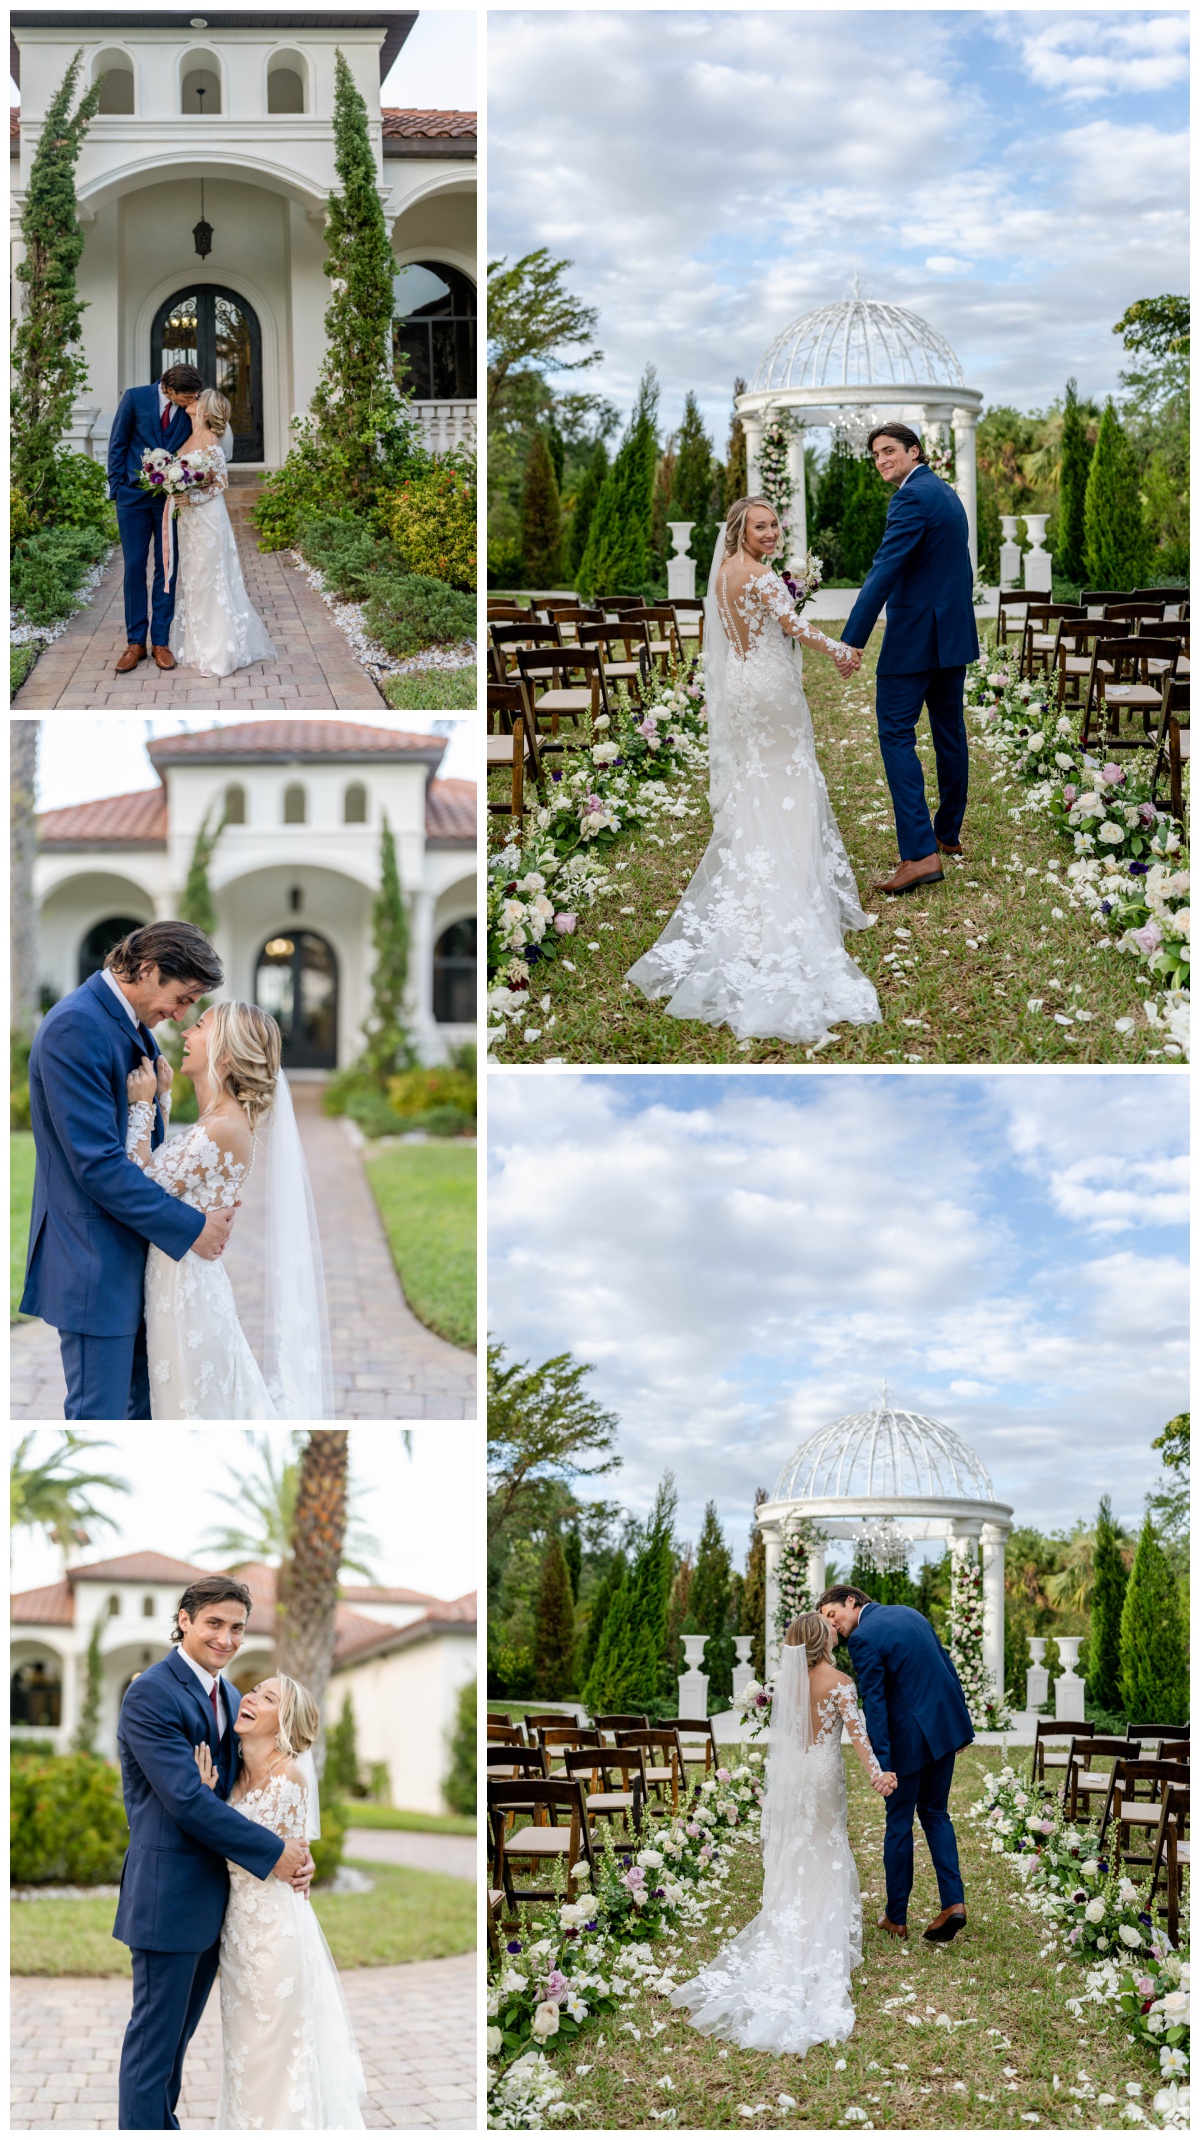 bride and groom embrace at gazebo ceremony site at Fort Myers wedding venue